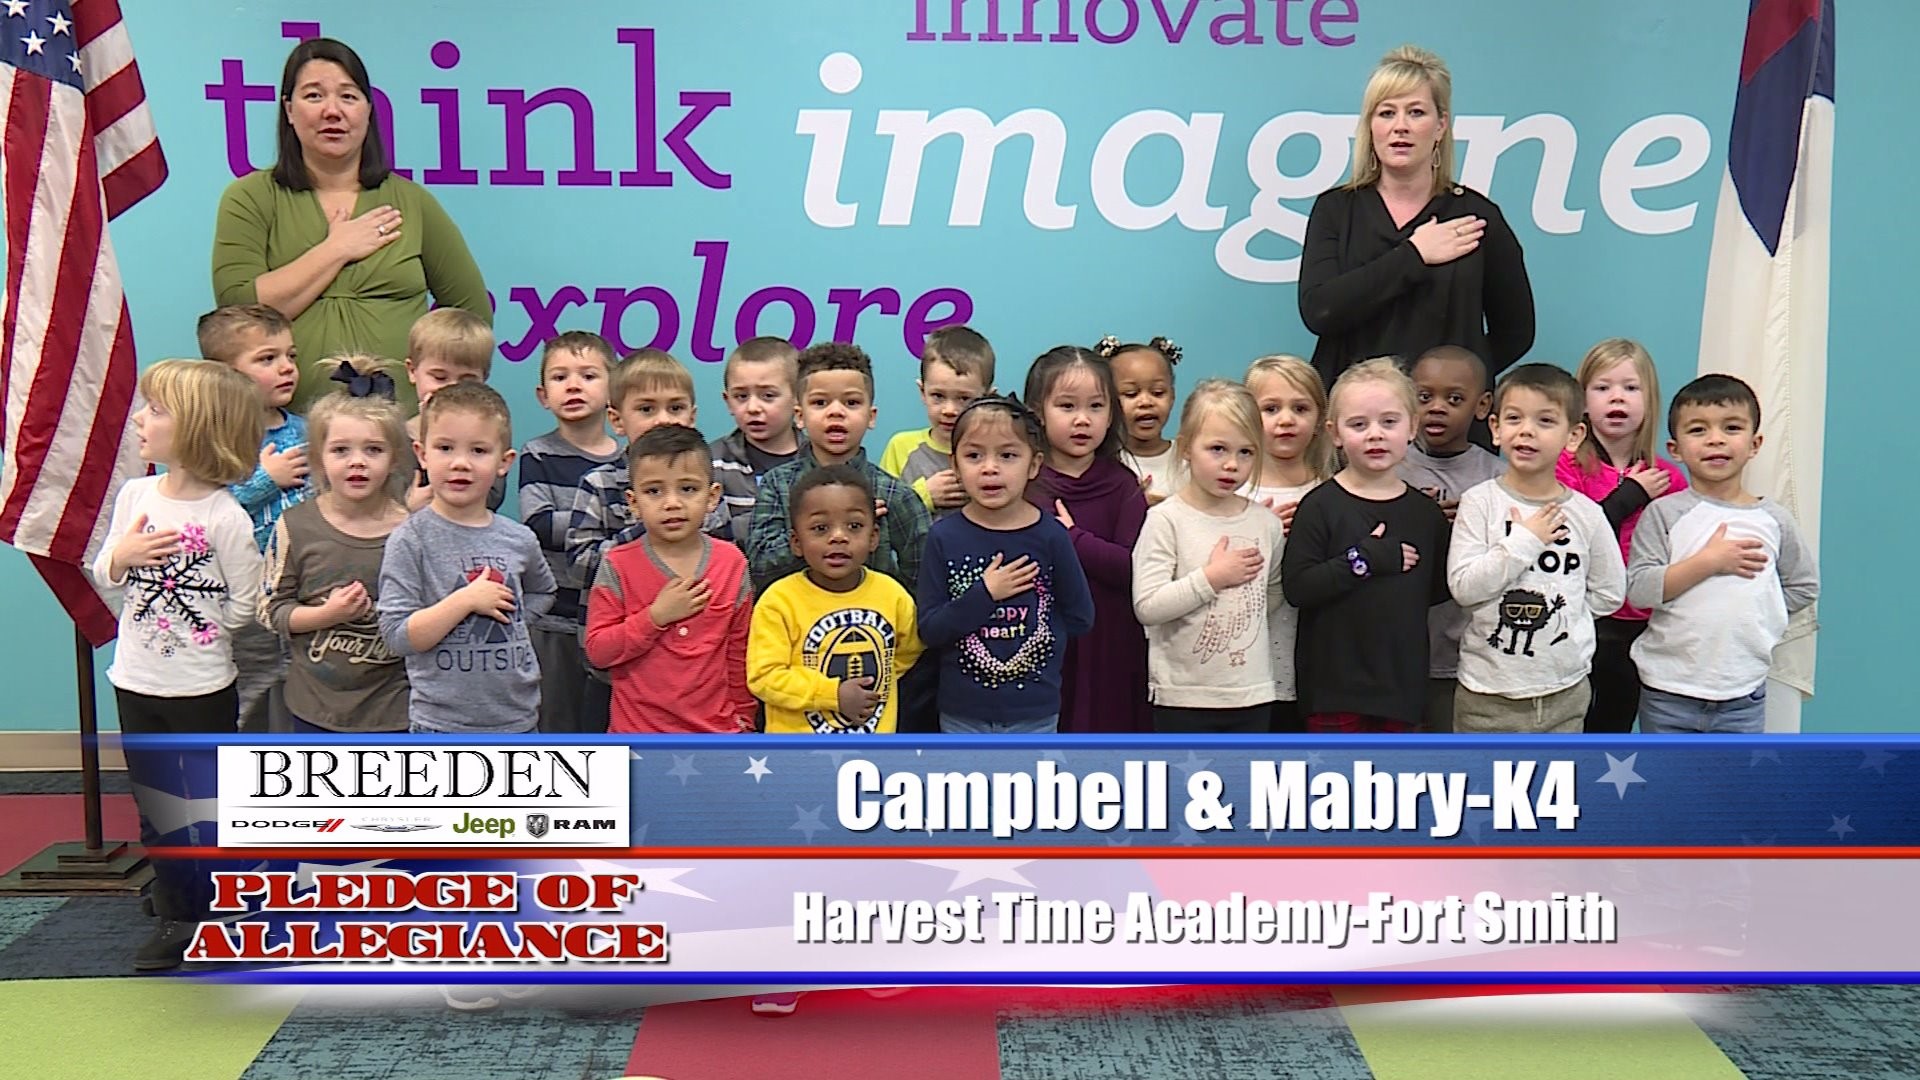 Campbell & Mabry  K4  Harvest Time Academy  Fort Smith